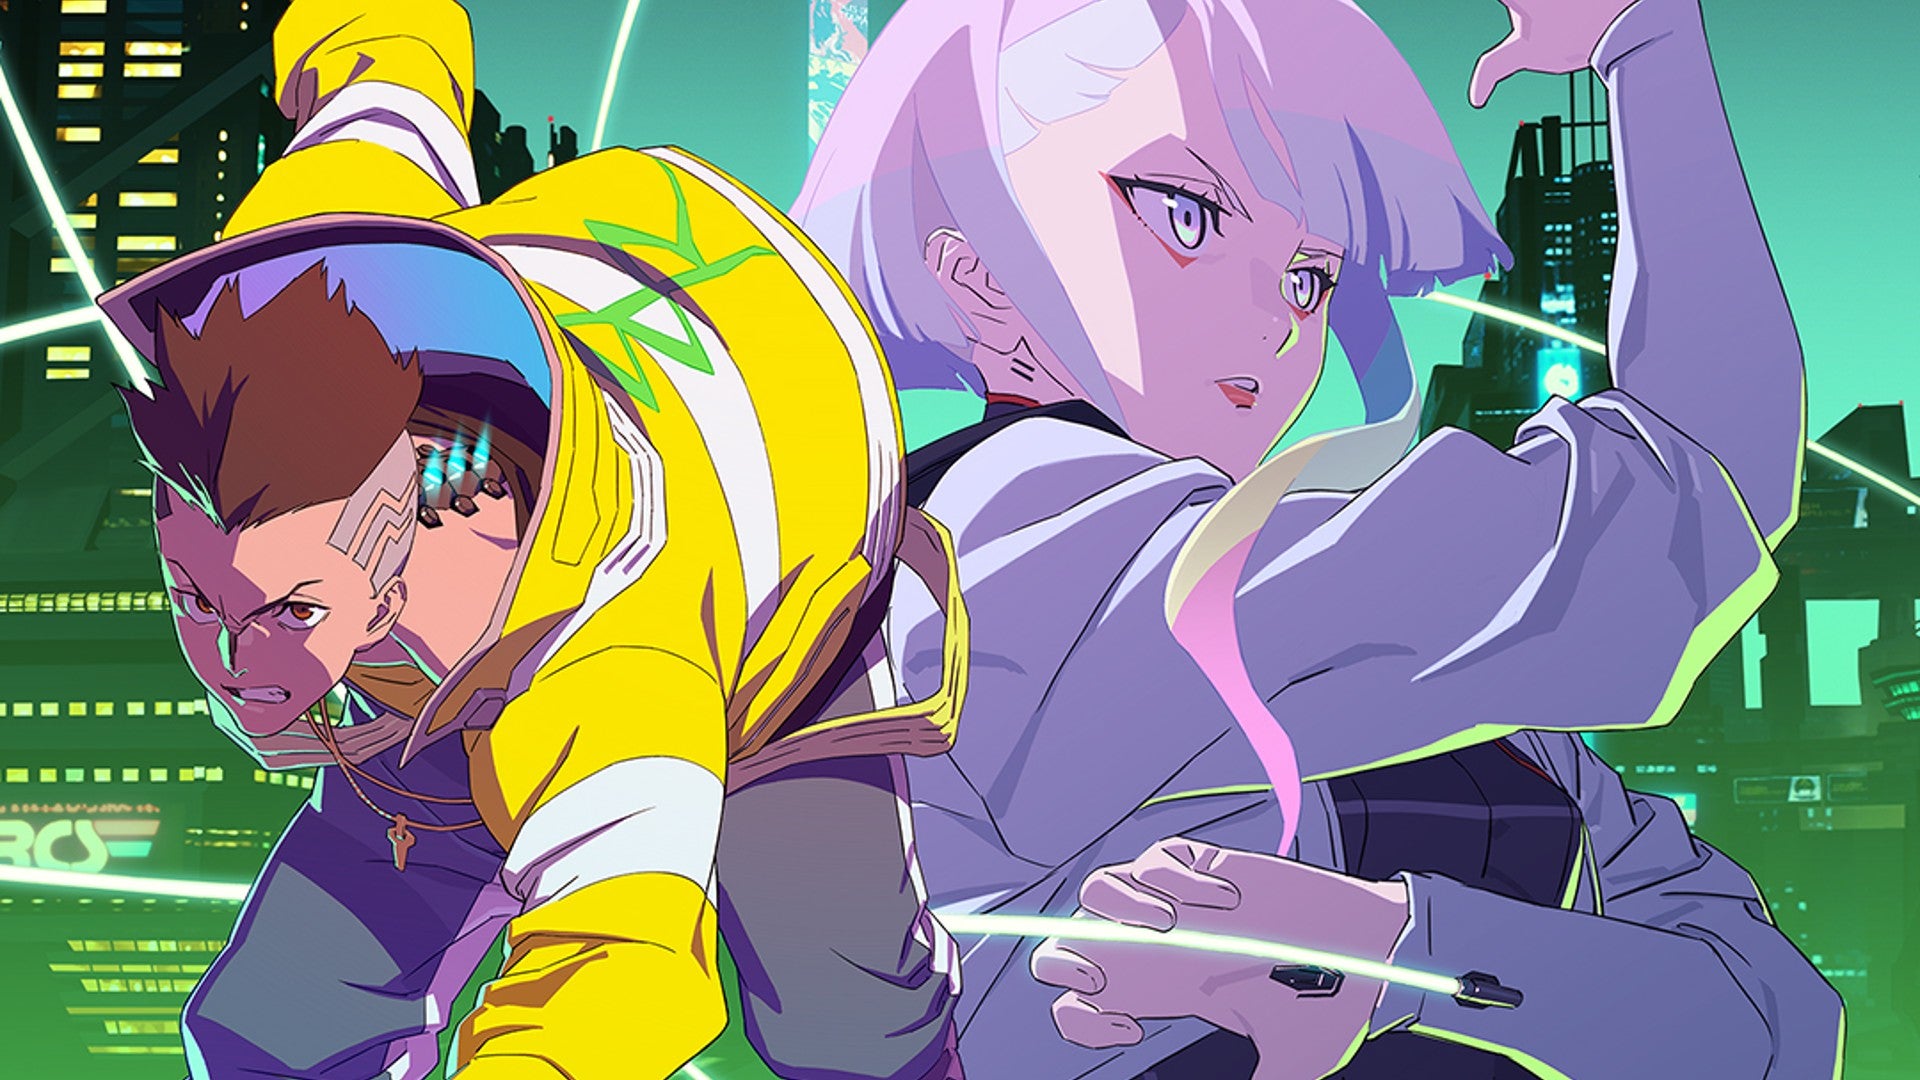 Cyberpunk: Edgerunners is an anime from Studio Trigger produced by CD Projekt and Netflix.